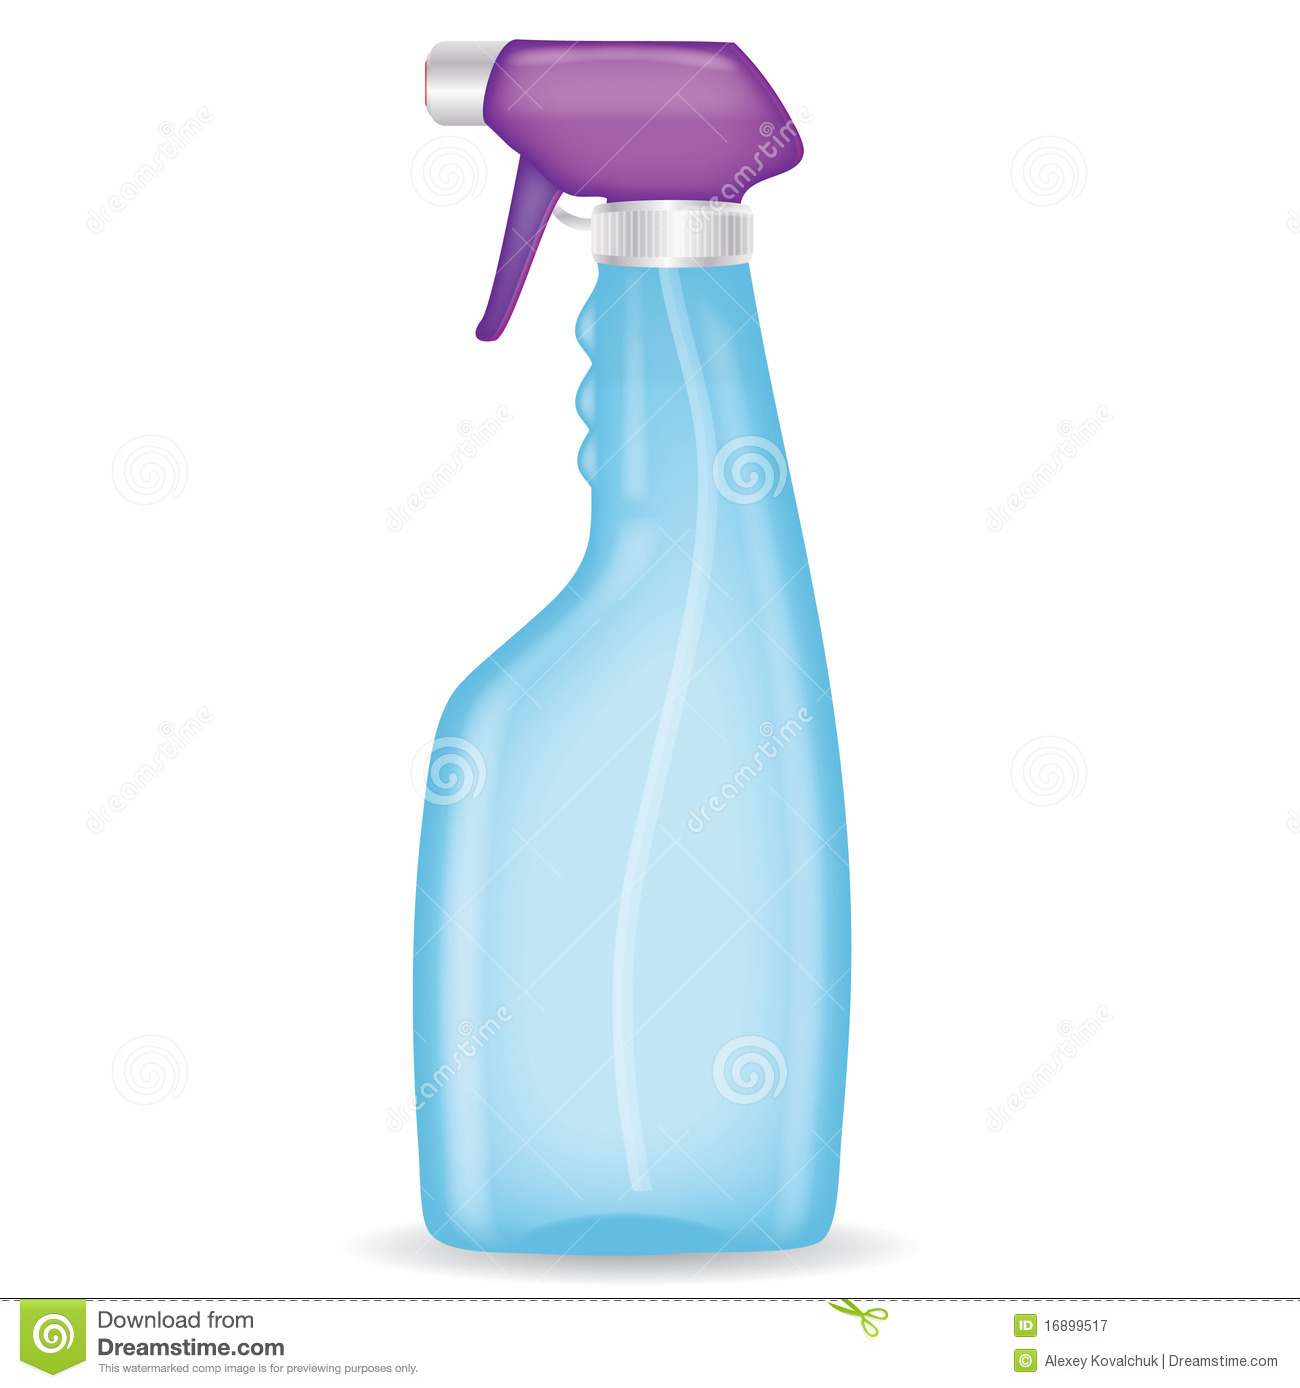 Spray Bottlevector Royalty Free Stock Photography   Image  16899517